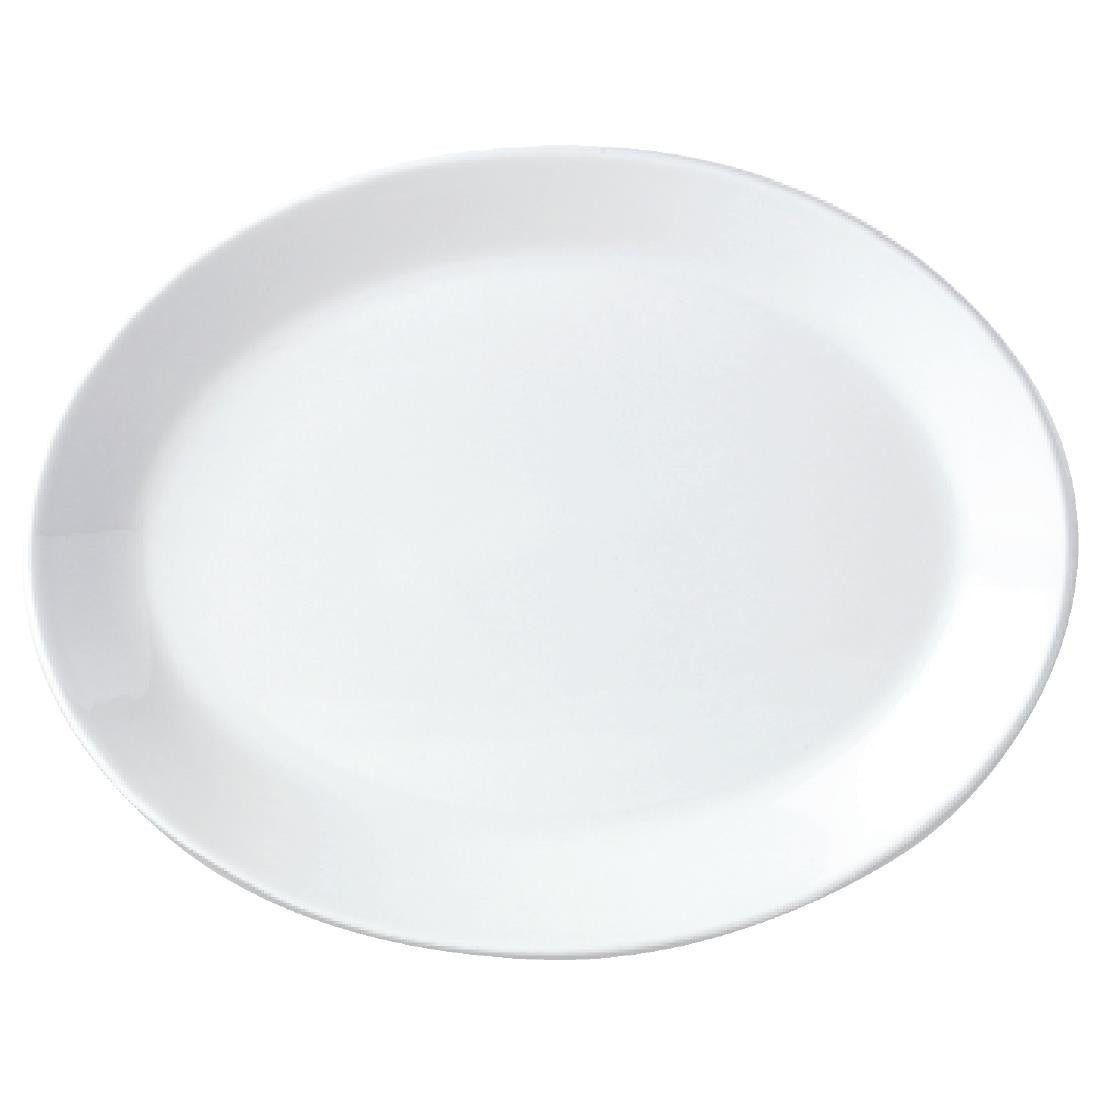 V0027 Steelite Simplicity White Oval Coupe Dishes 255mm (Pack of 12)